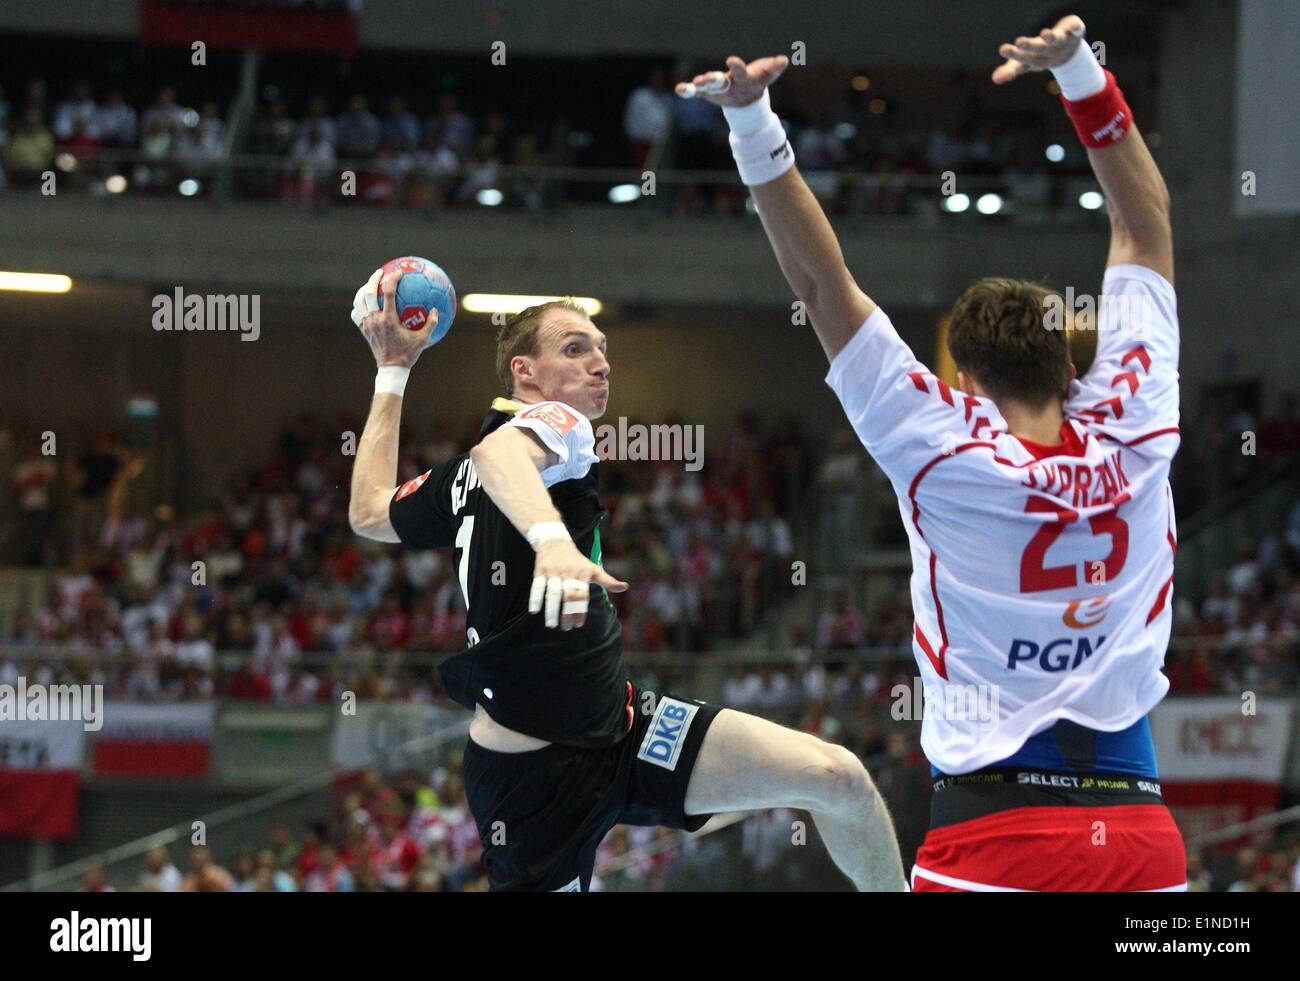 Gdansk, Poland 7th, June 2014 Quatar 2015 Men's World Handball Championship Play Off game between Poland and Germany at ERGO Arena sports hall. Kamil Syprzak (23) in action during the game. Credit:  Michal Fludra/Alamy Live News Stock Photo